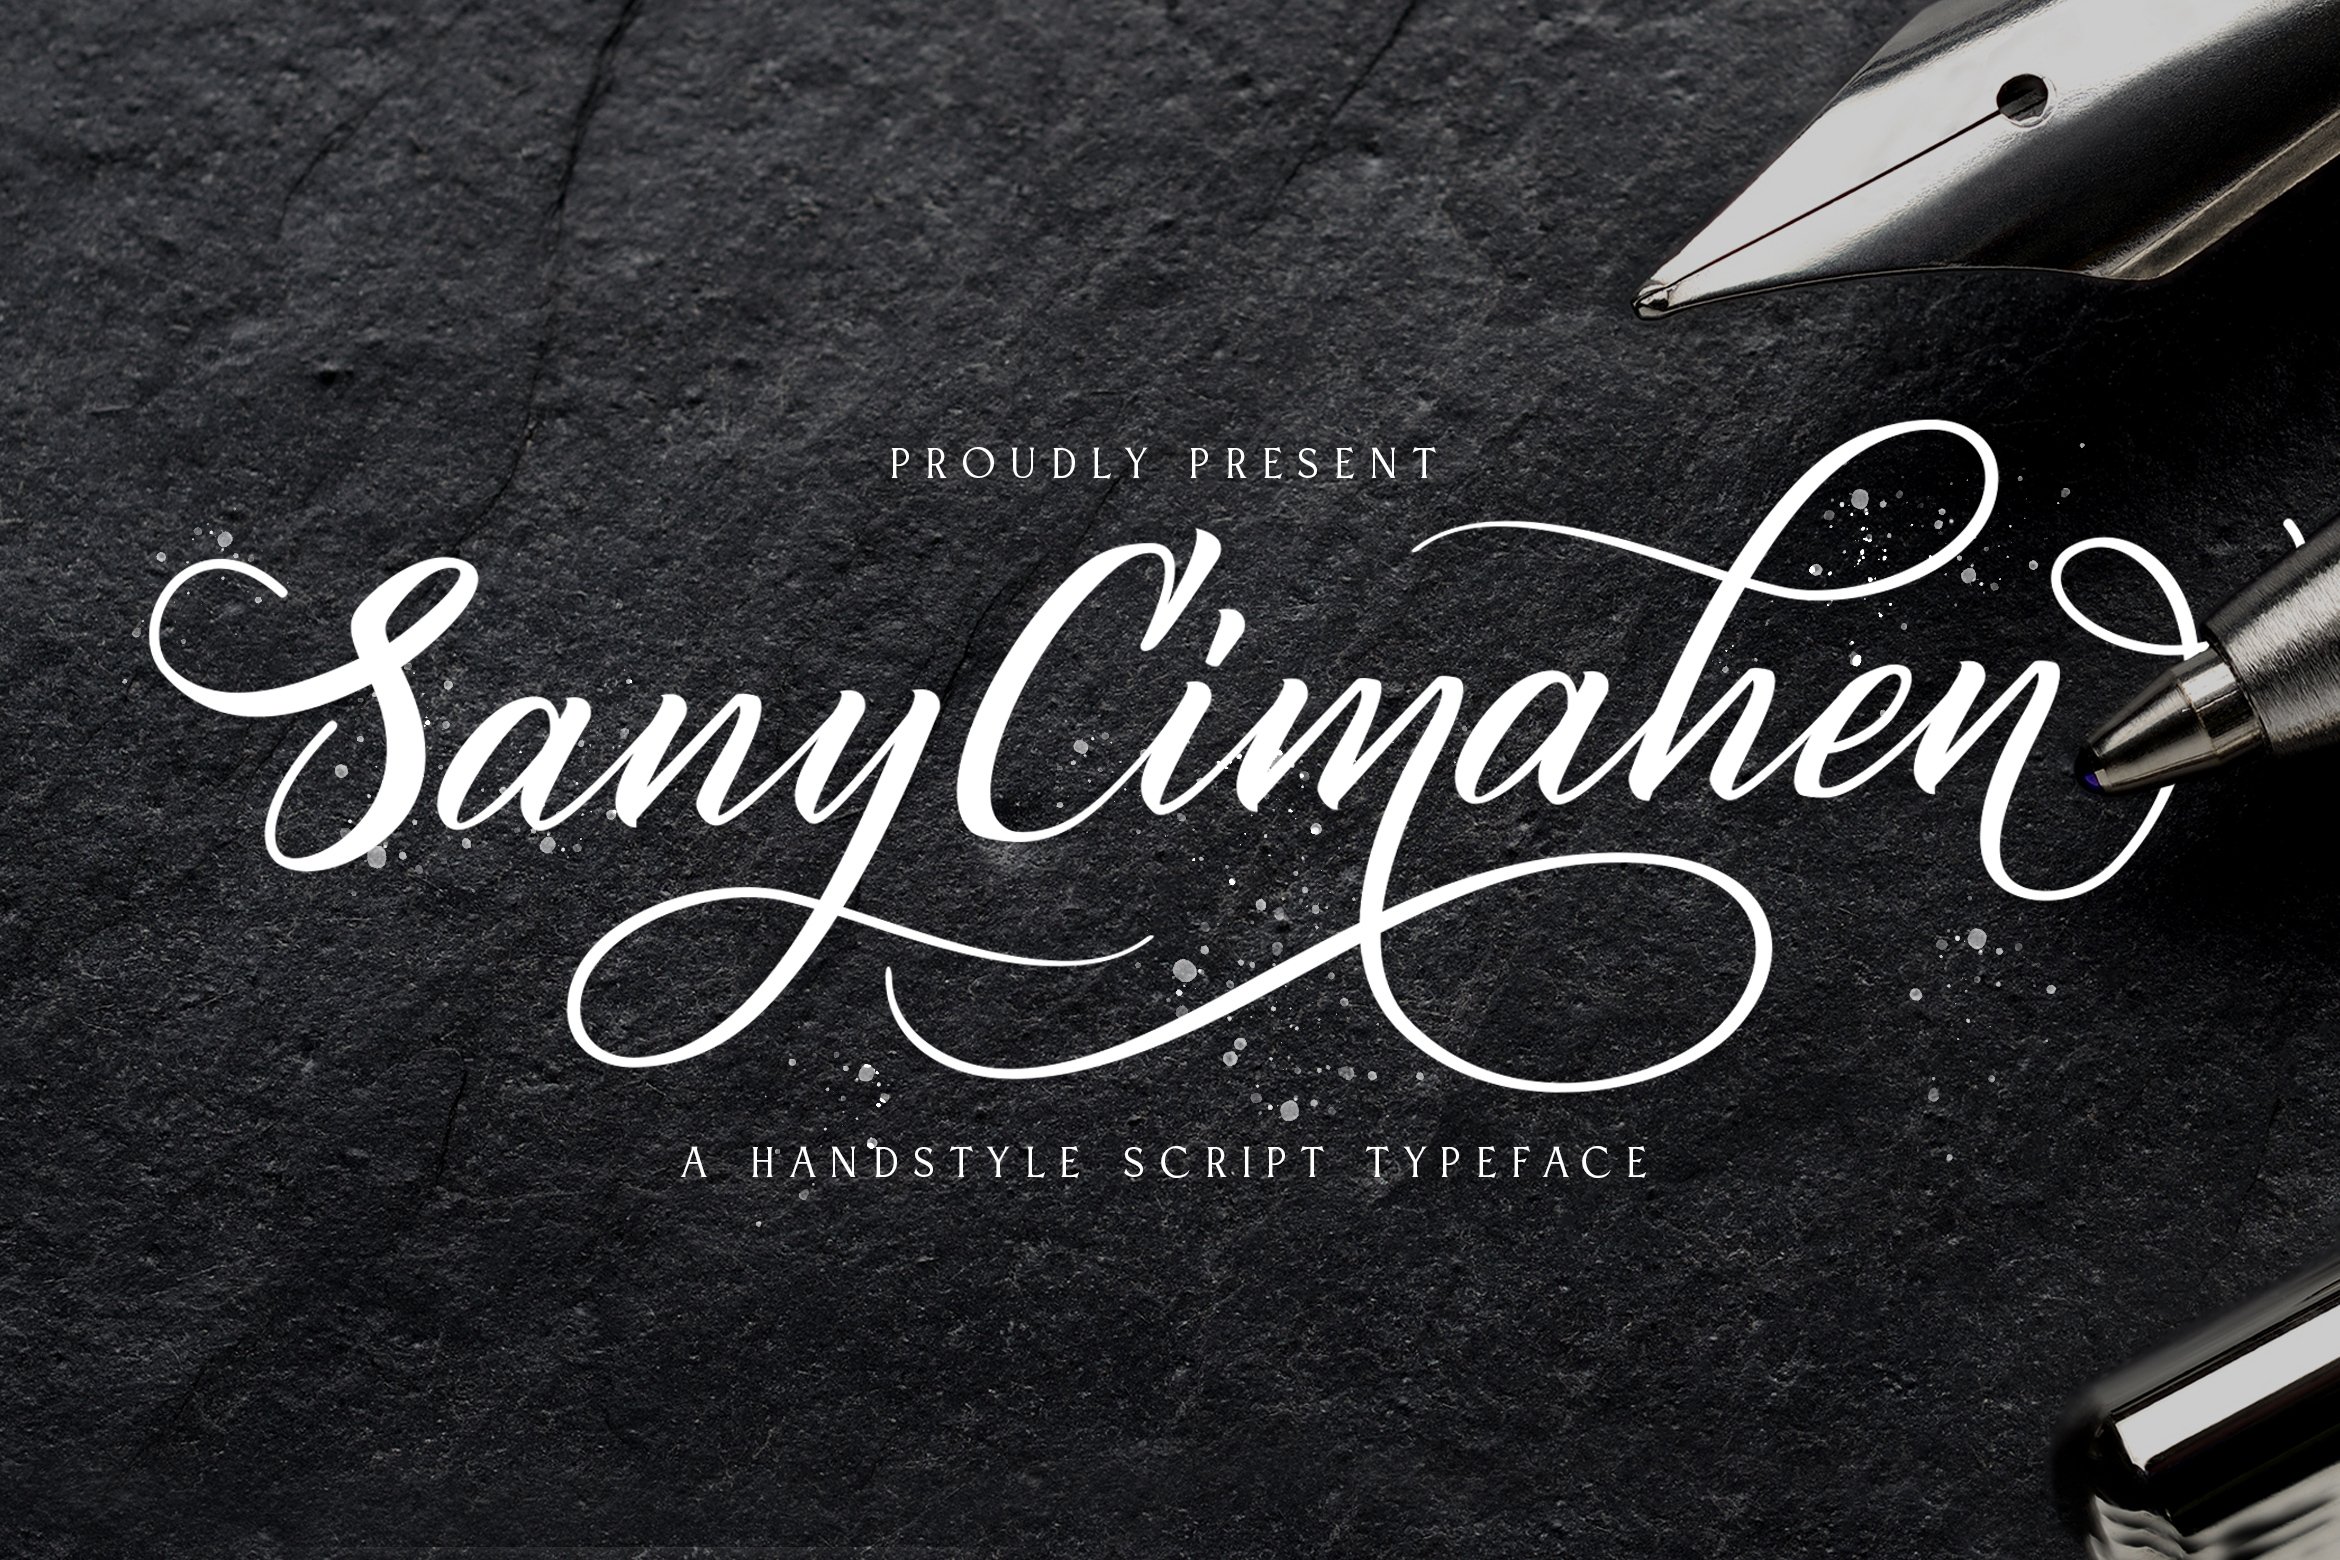 Sany Cimahen - Handwritten Font cover image.